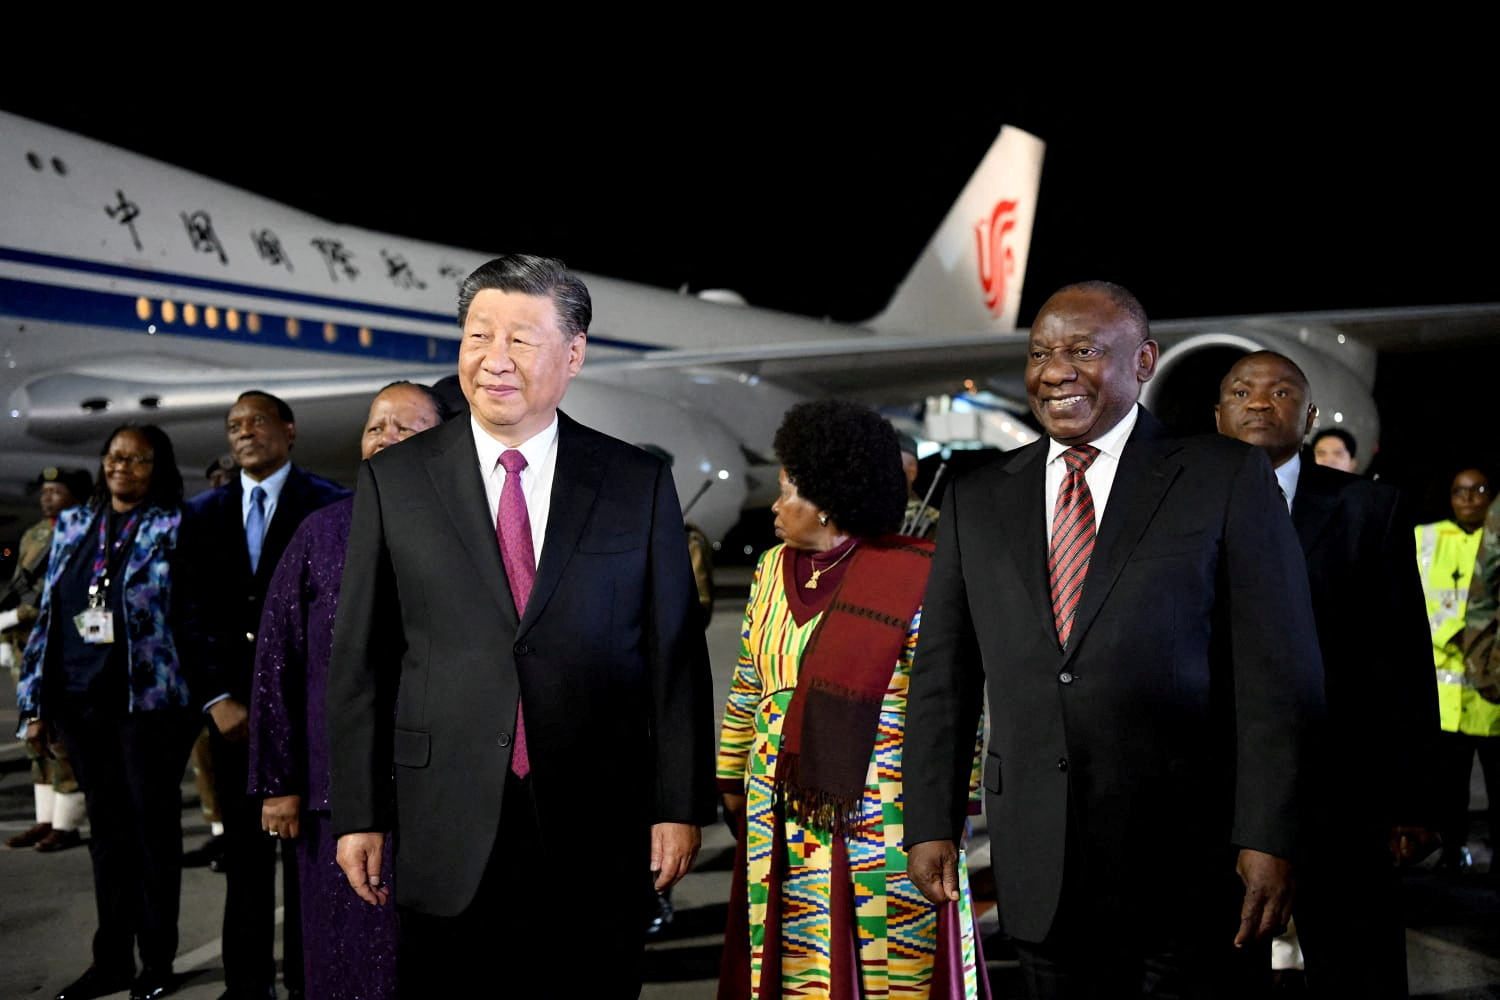 Chinese President Xi Jinping lands in South Africa for BRICS Summit